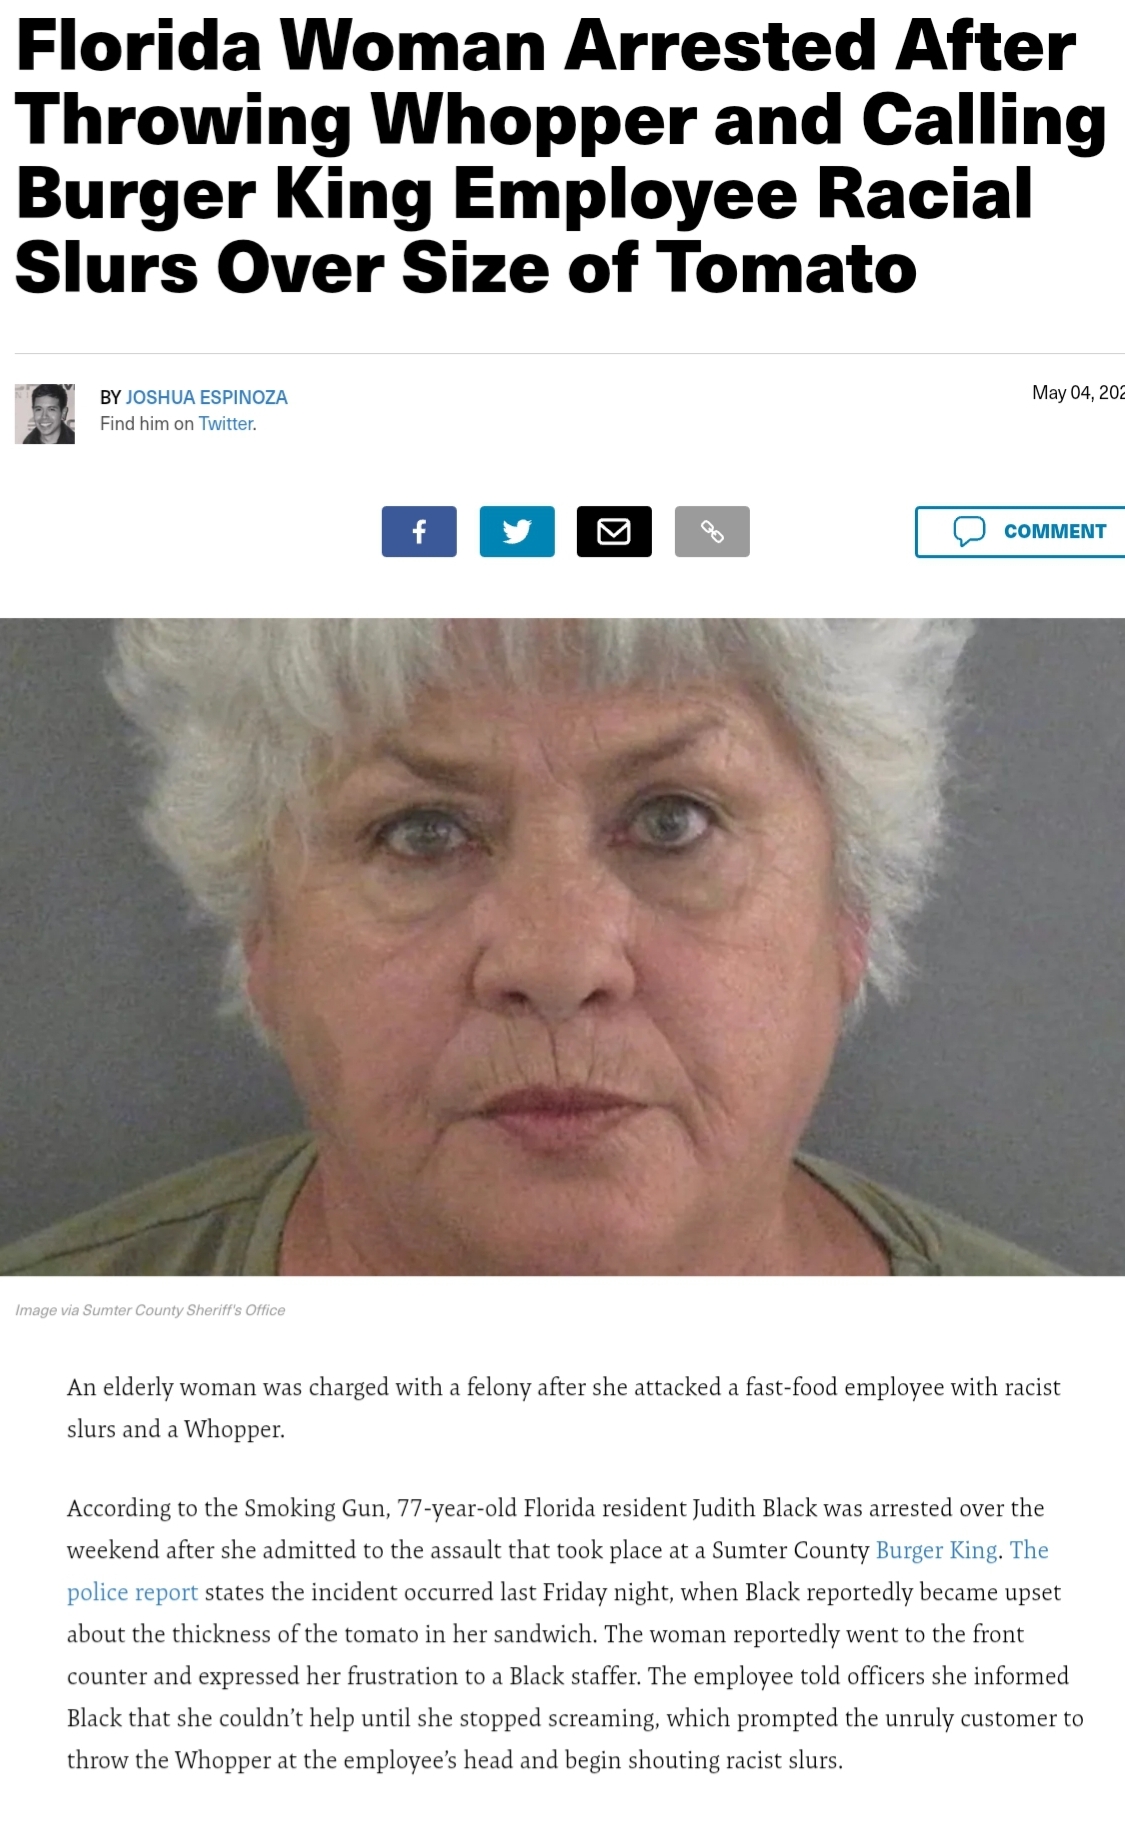 Florida Lady Arrested After Throwing Whopper and Calling Burger King Worker Racial Slurs Over Size of Tomato